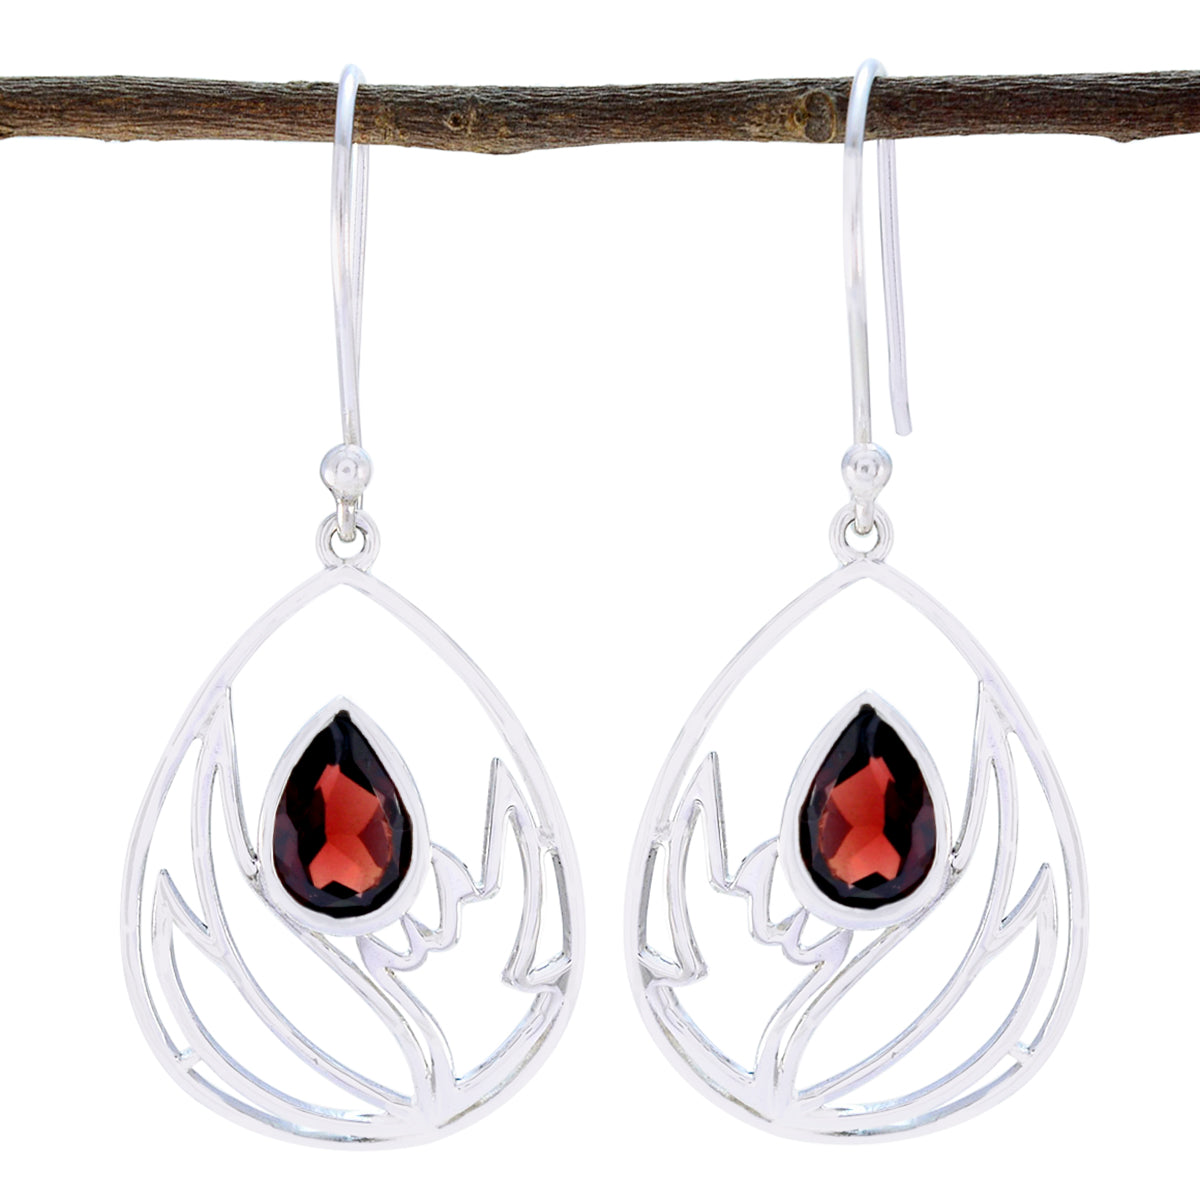 Riyo Good Gemstones Pear Faceted Red Garnet Silver Earring gift for cyber Monday